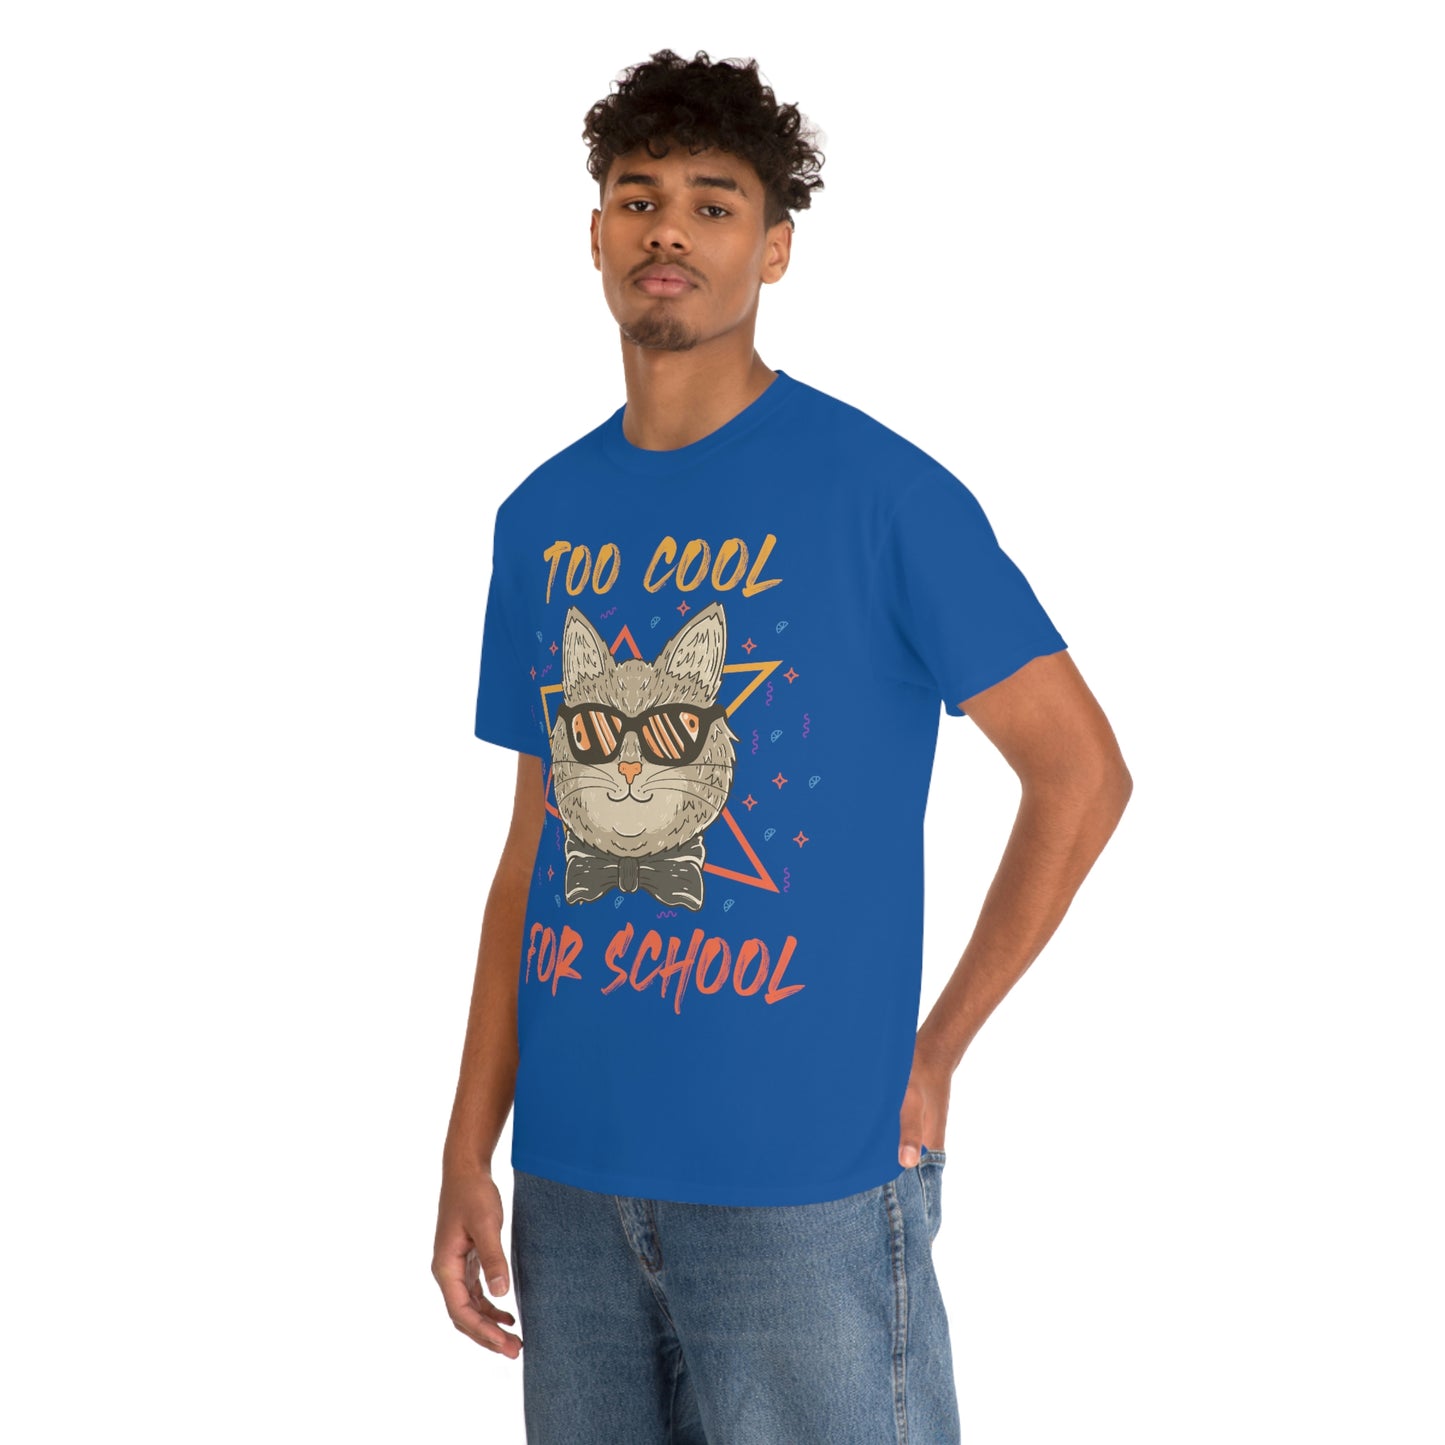 Too Cool for School Cotton Tee